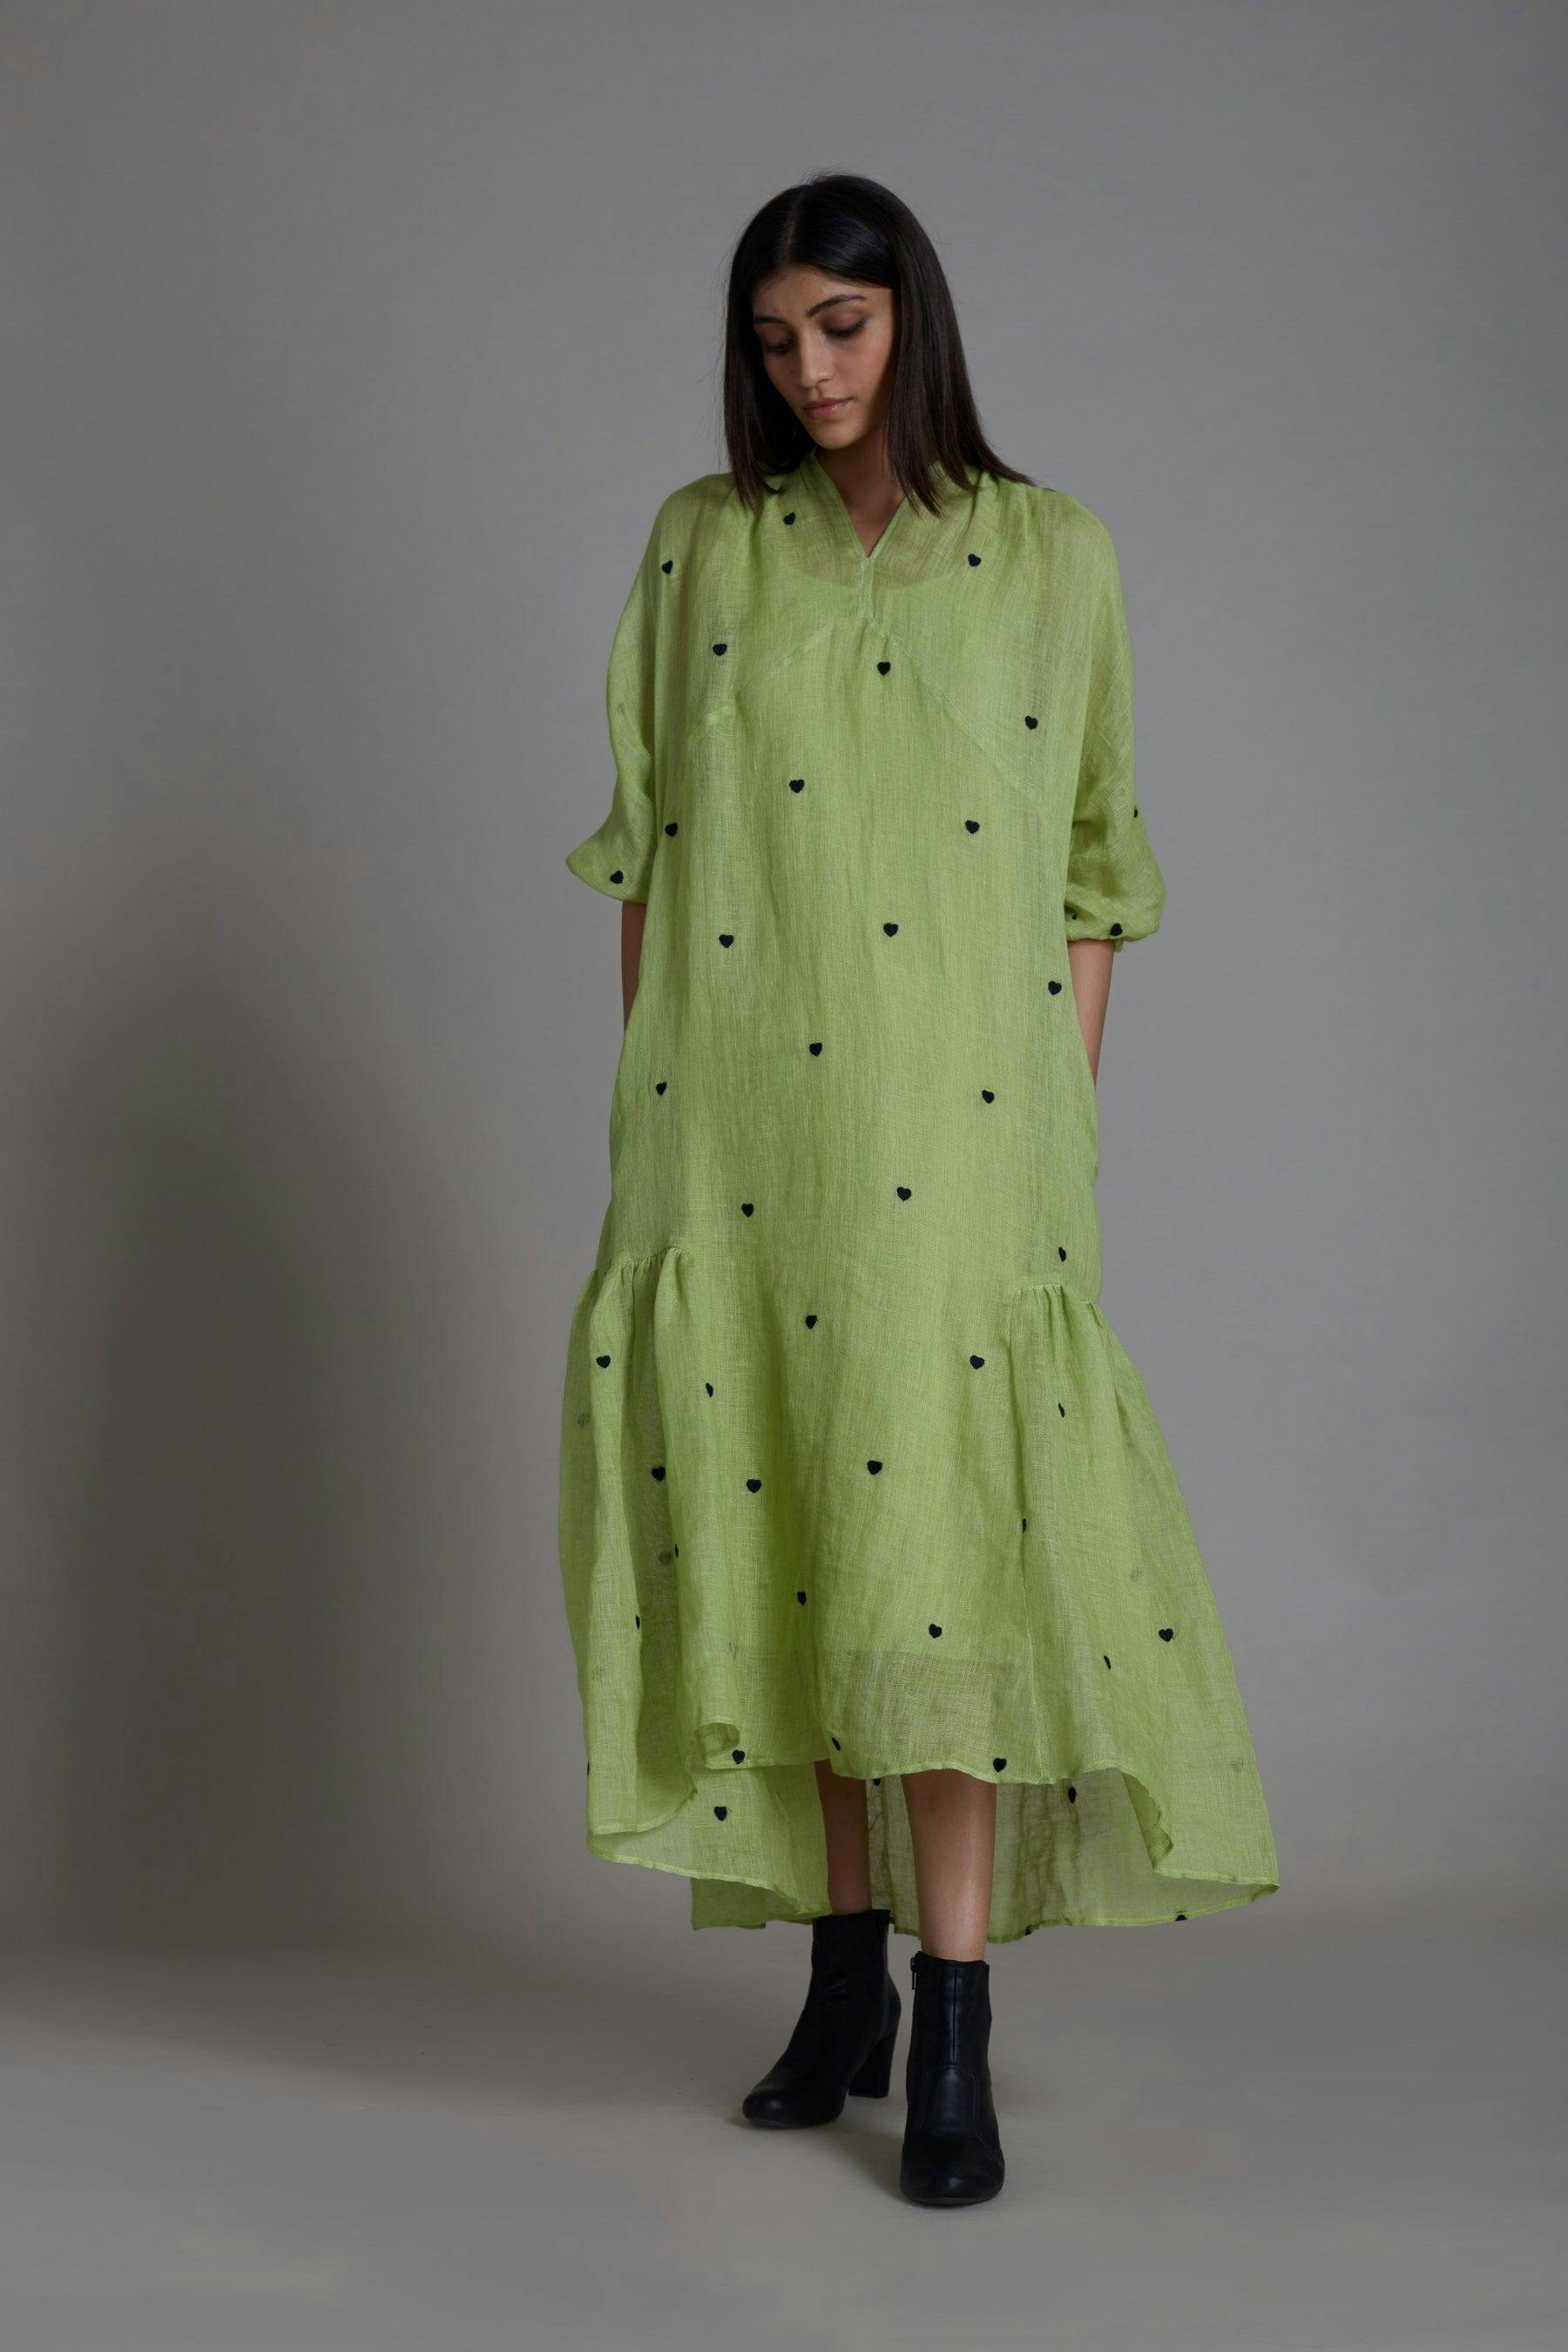 Mati Queen of Hearts Dress-Green, a product by Style Mati